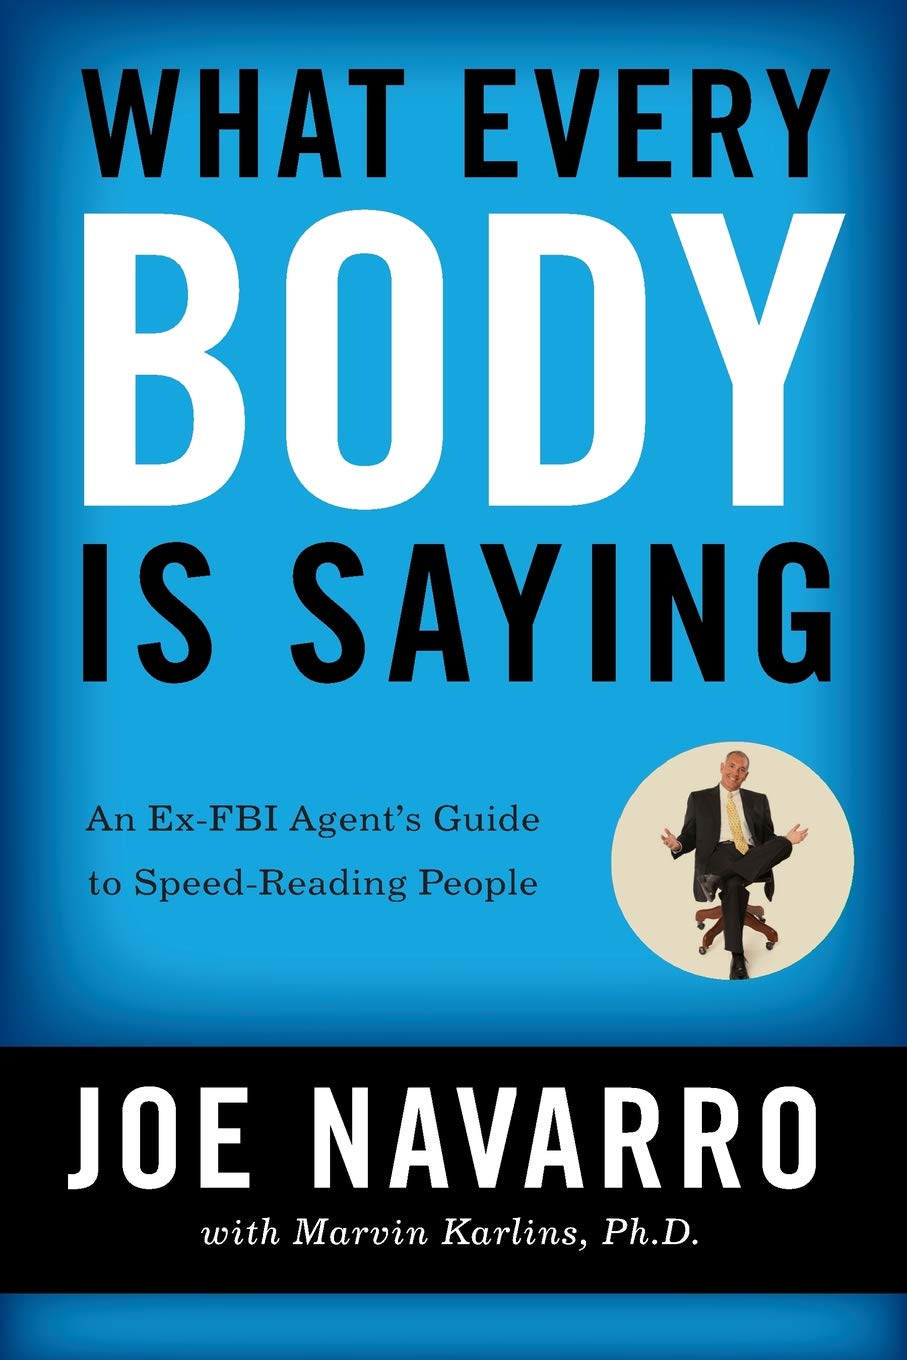 Book about body language